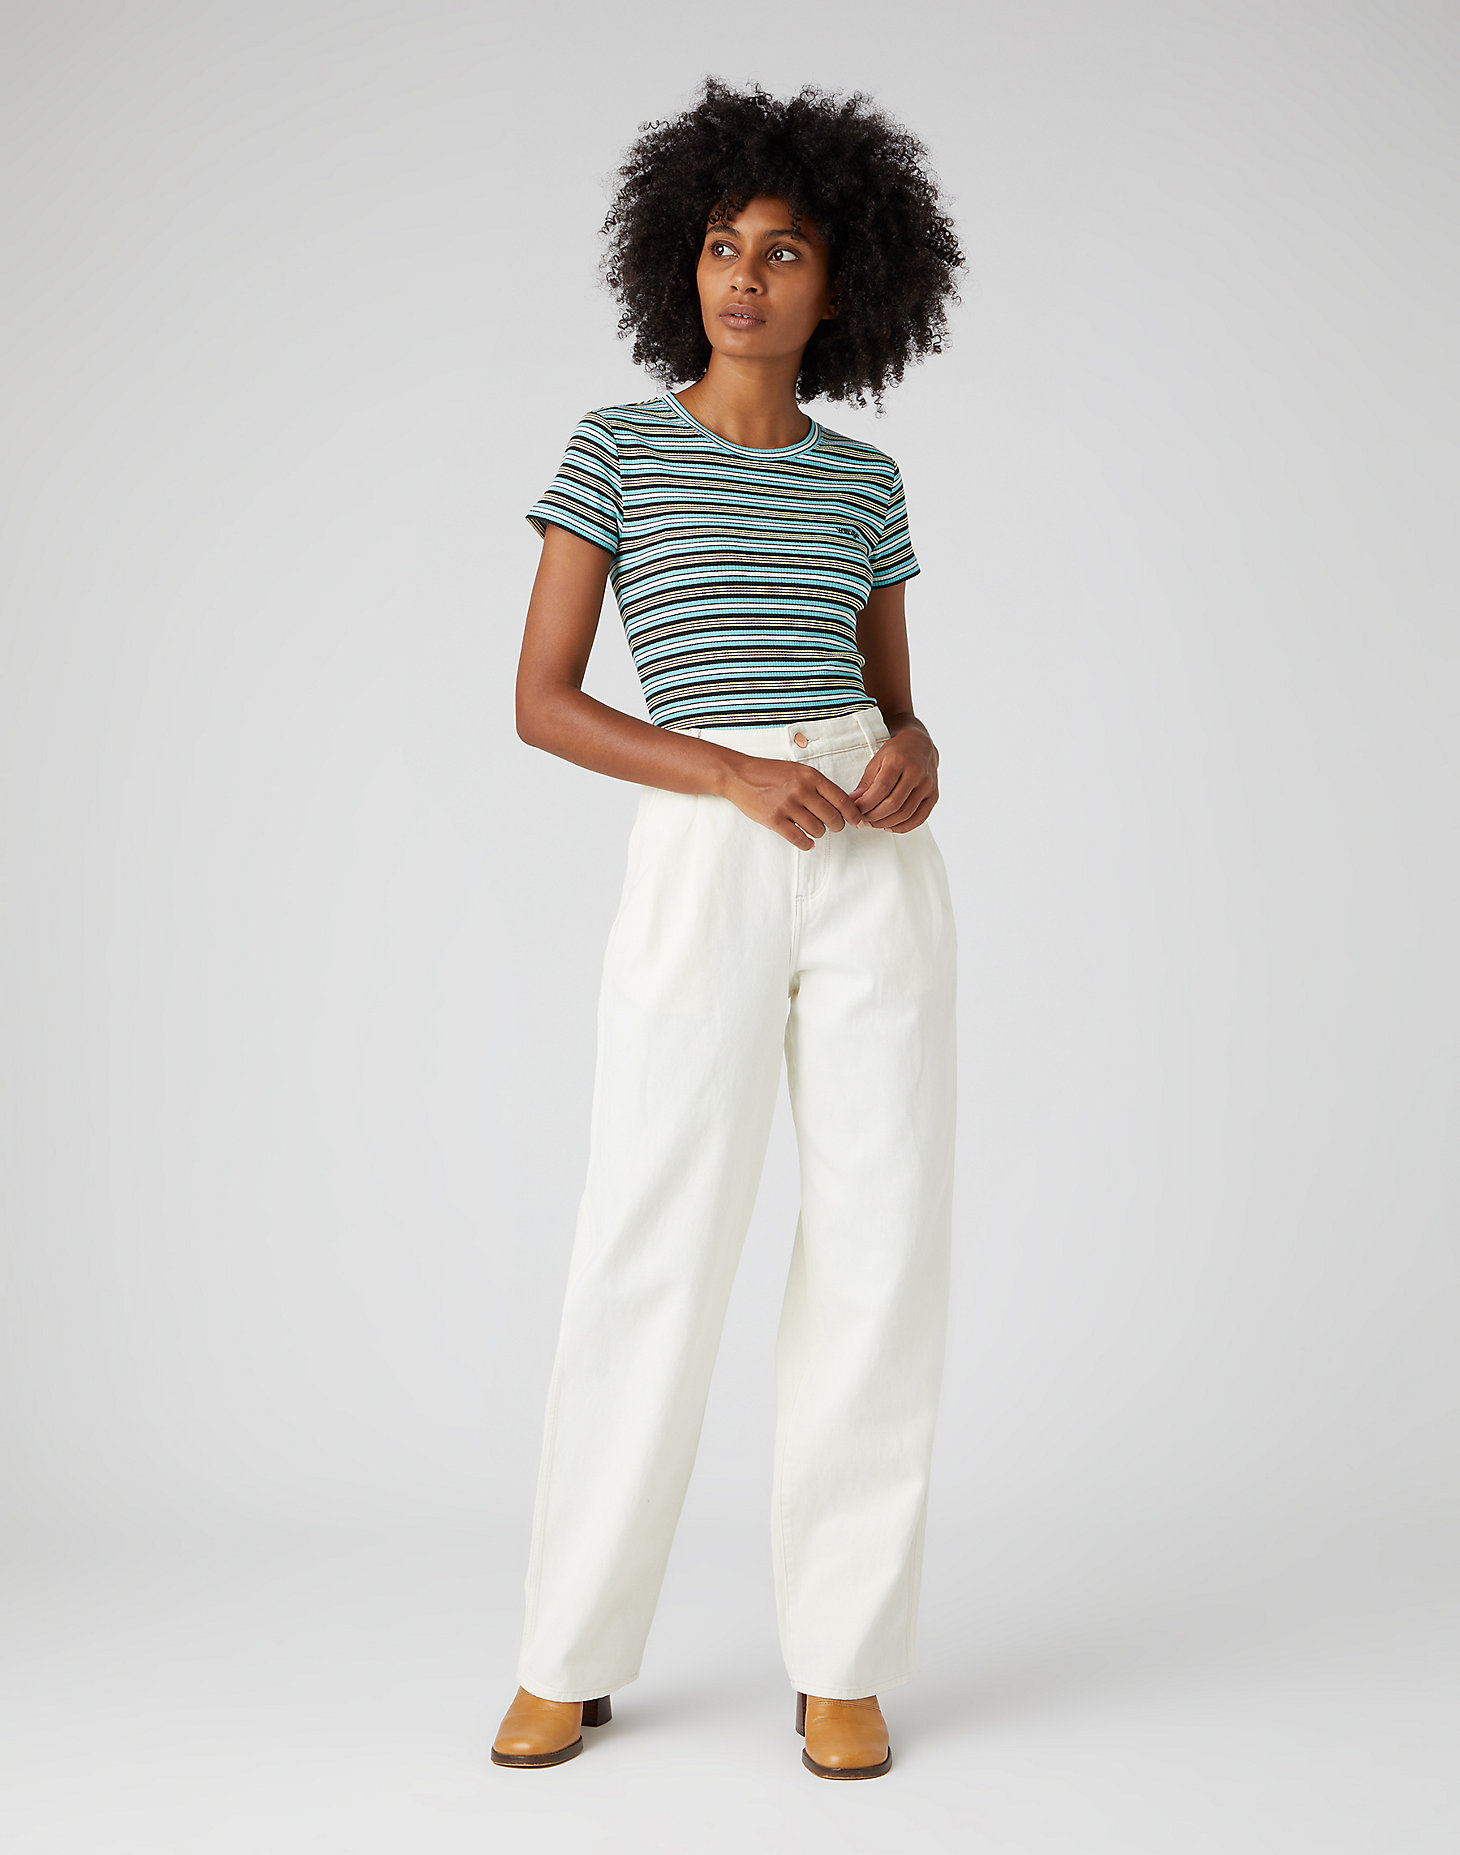 Pleated Crop Barrel Jeans in Vintage White alternative view 1